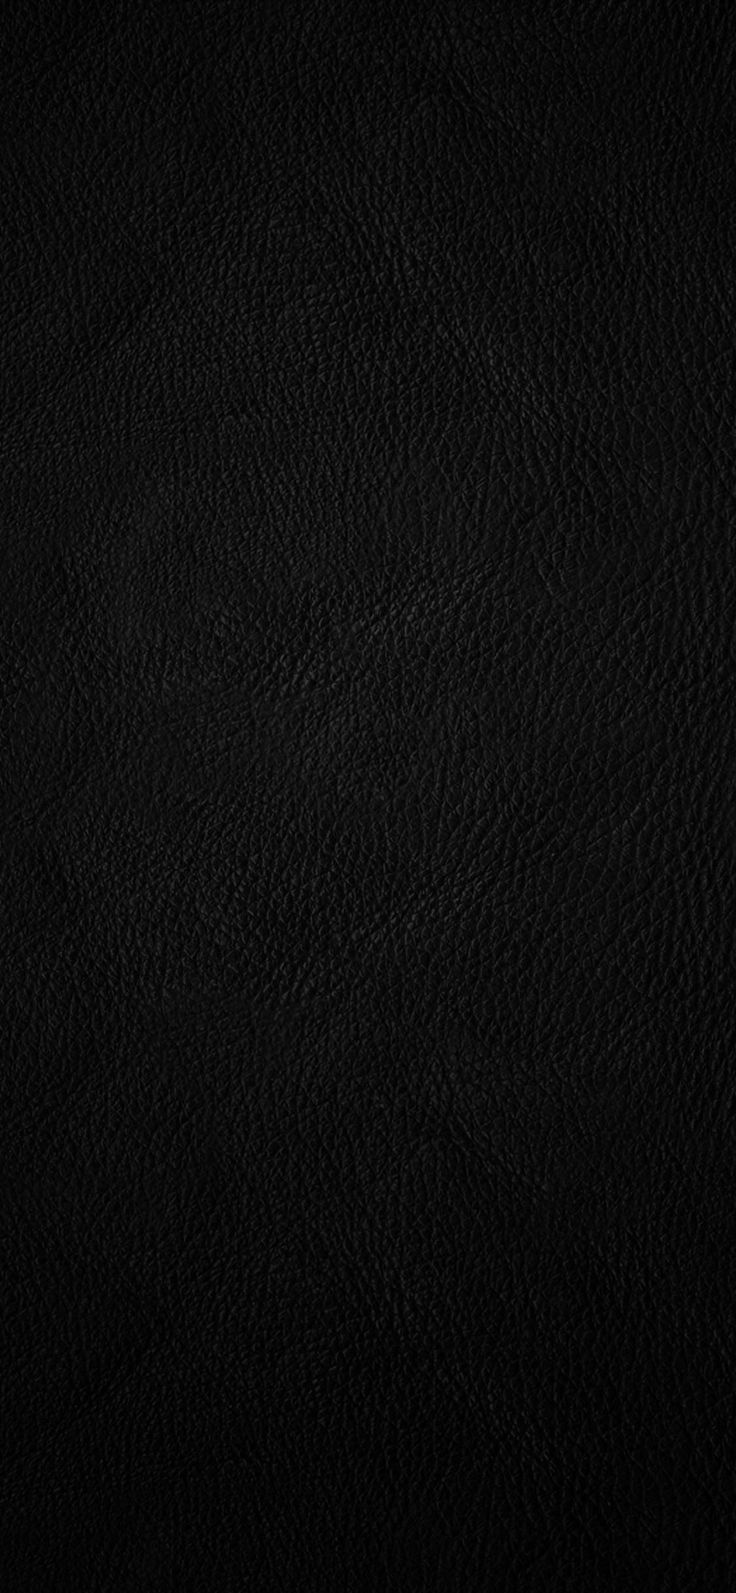 Leather iPhone Wallpapers - 4k, HD Leather iPhone Backgrounds on ...